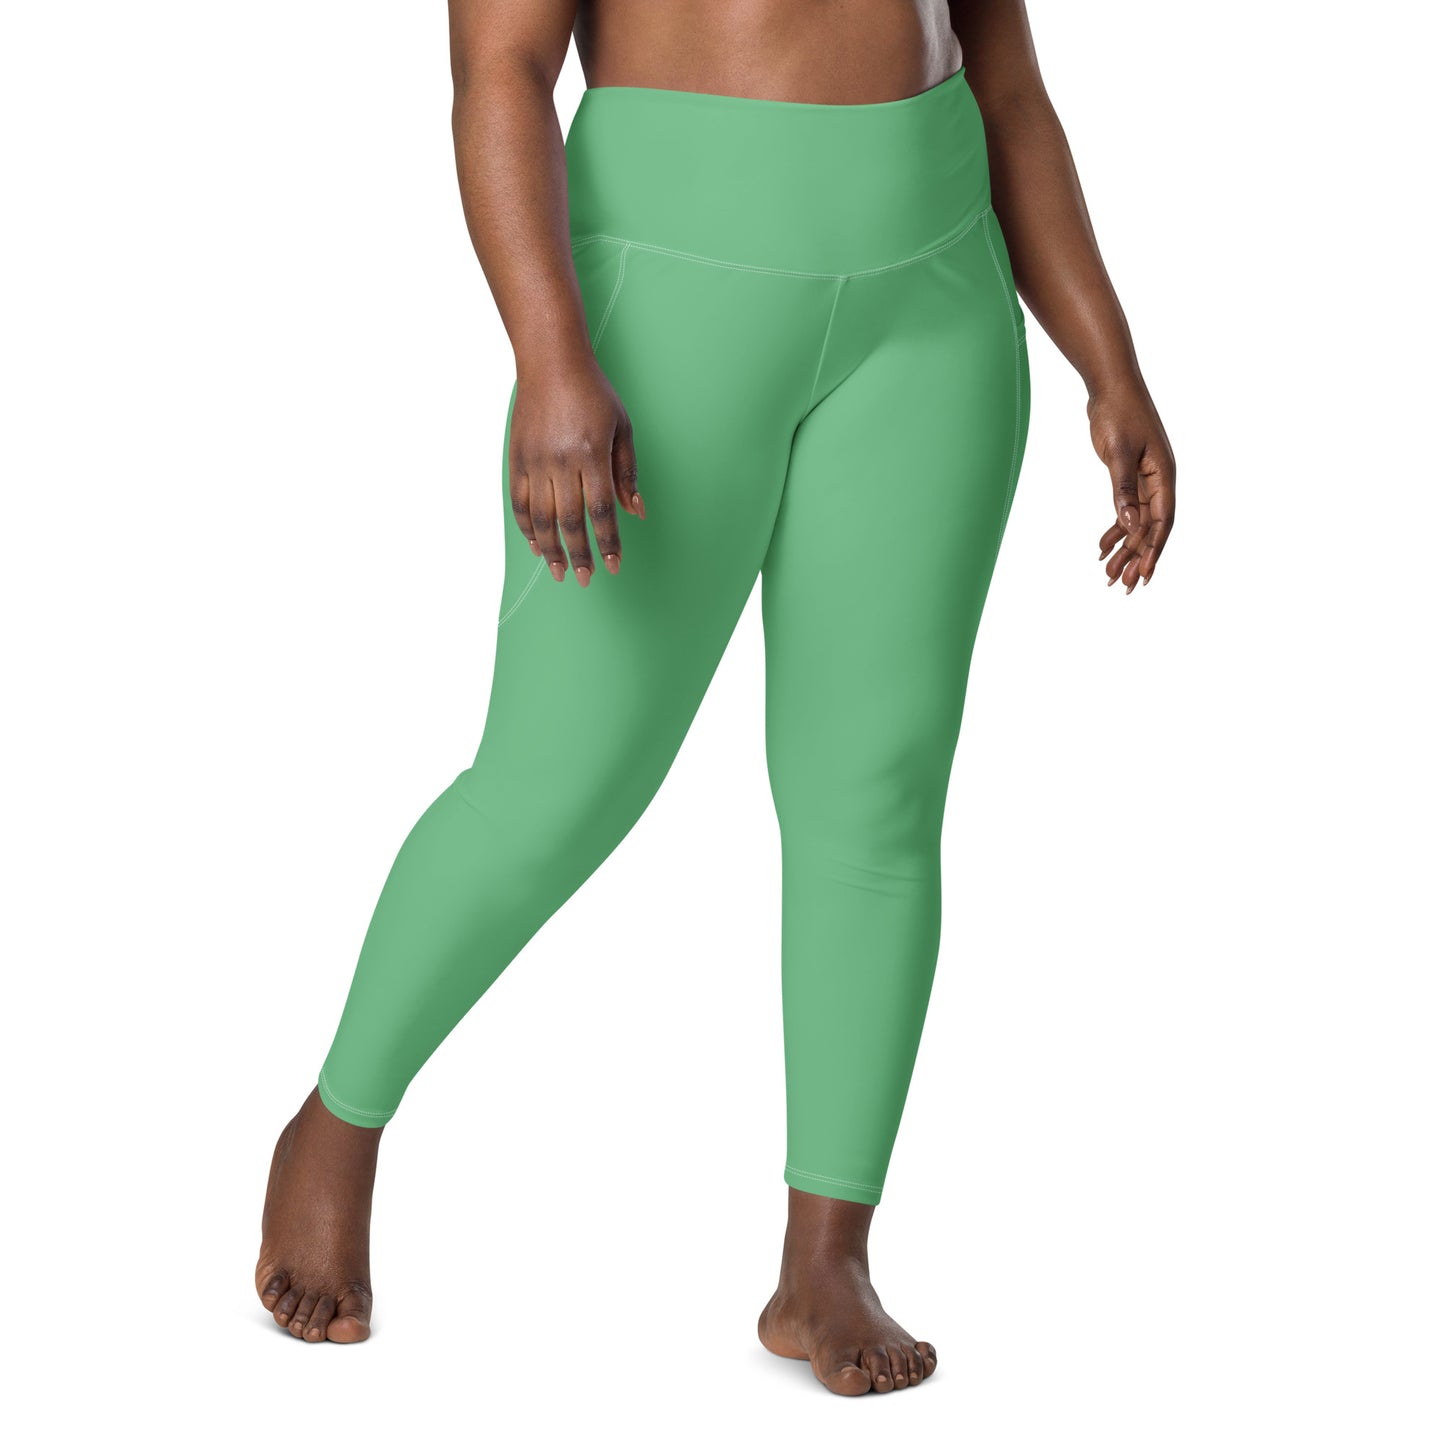 Marbella Solid Green High Waist 7/8 Recycled Yoga Leggings / Yoga Pants with Pockets